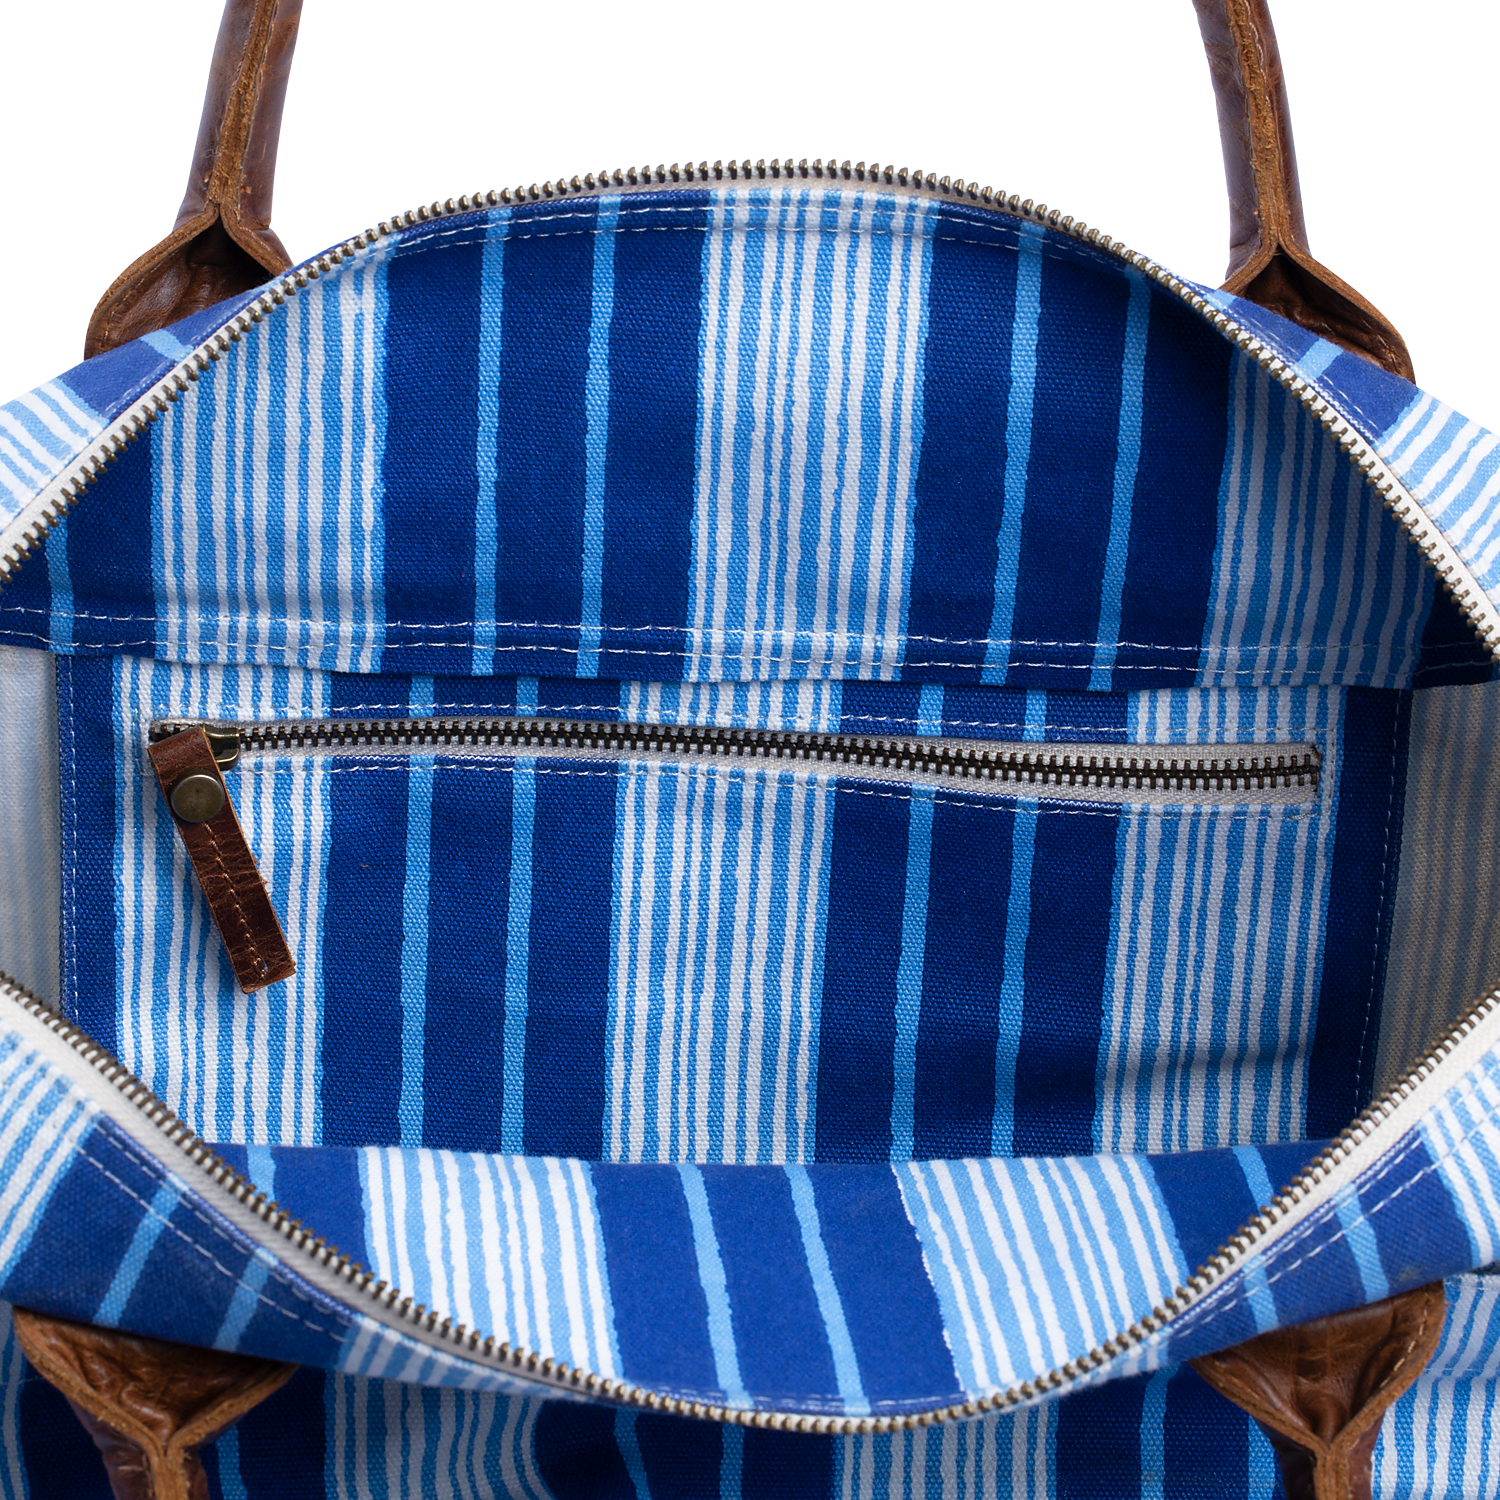 Vintage Stripe Canvas Duffle Bag with interior pockets by John Robshaw | Fig Linens and Home